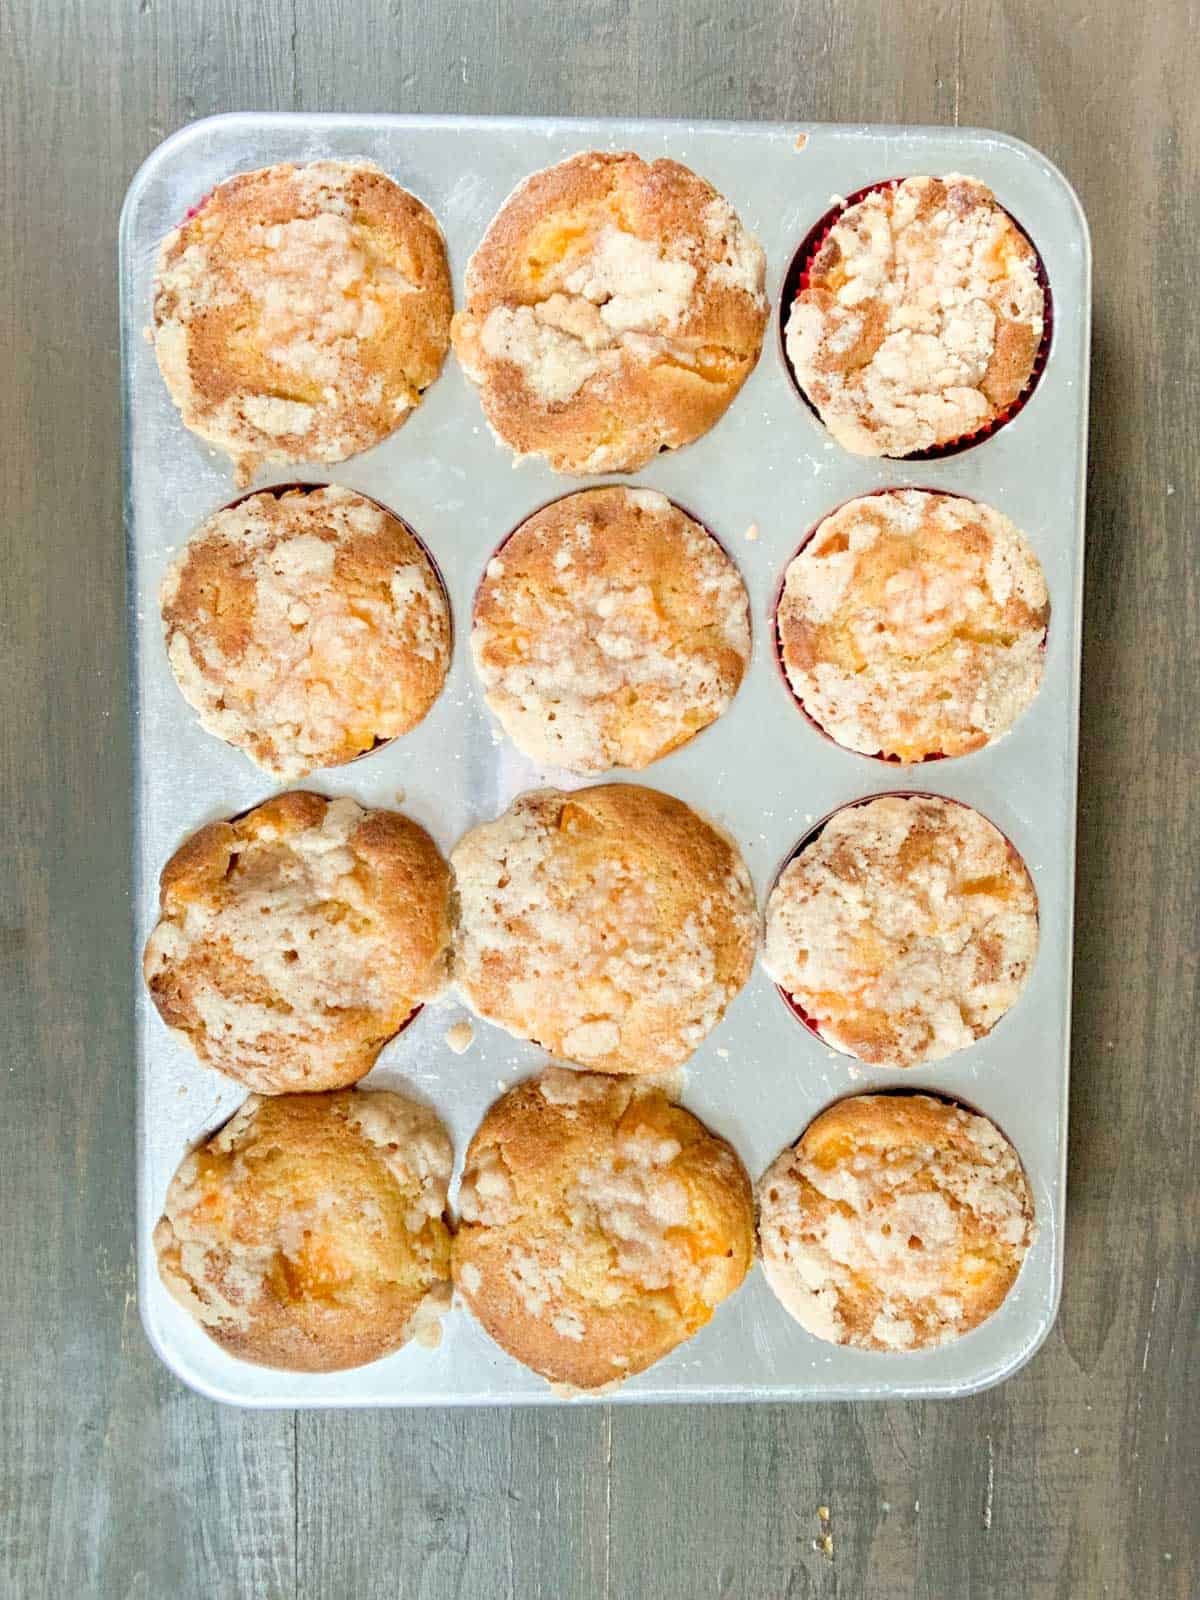 baked peach cobbler muffins in the muffin tray.